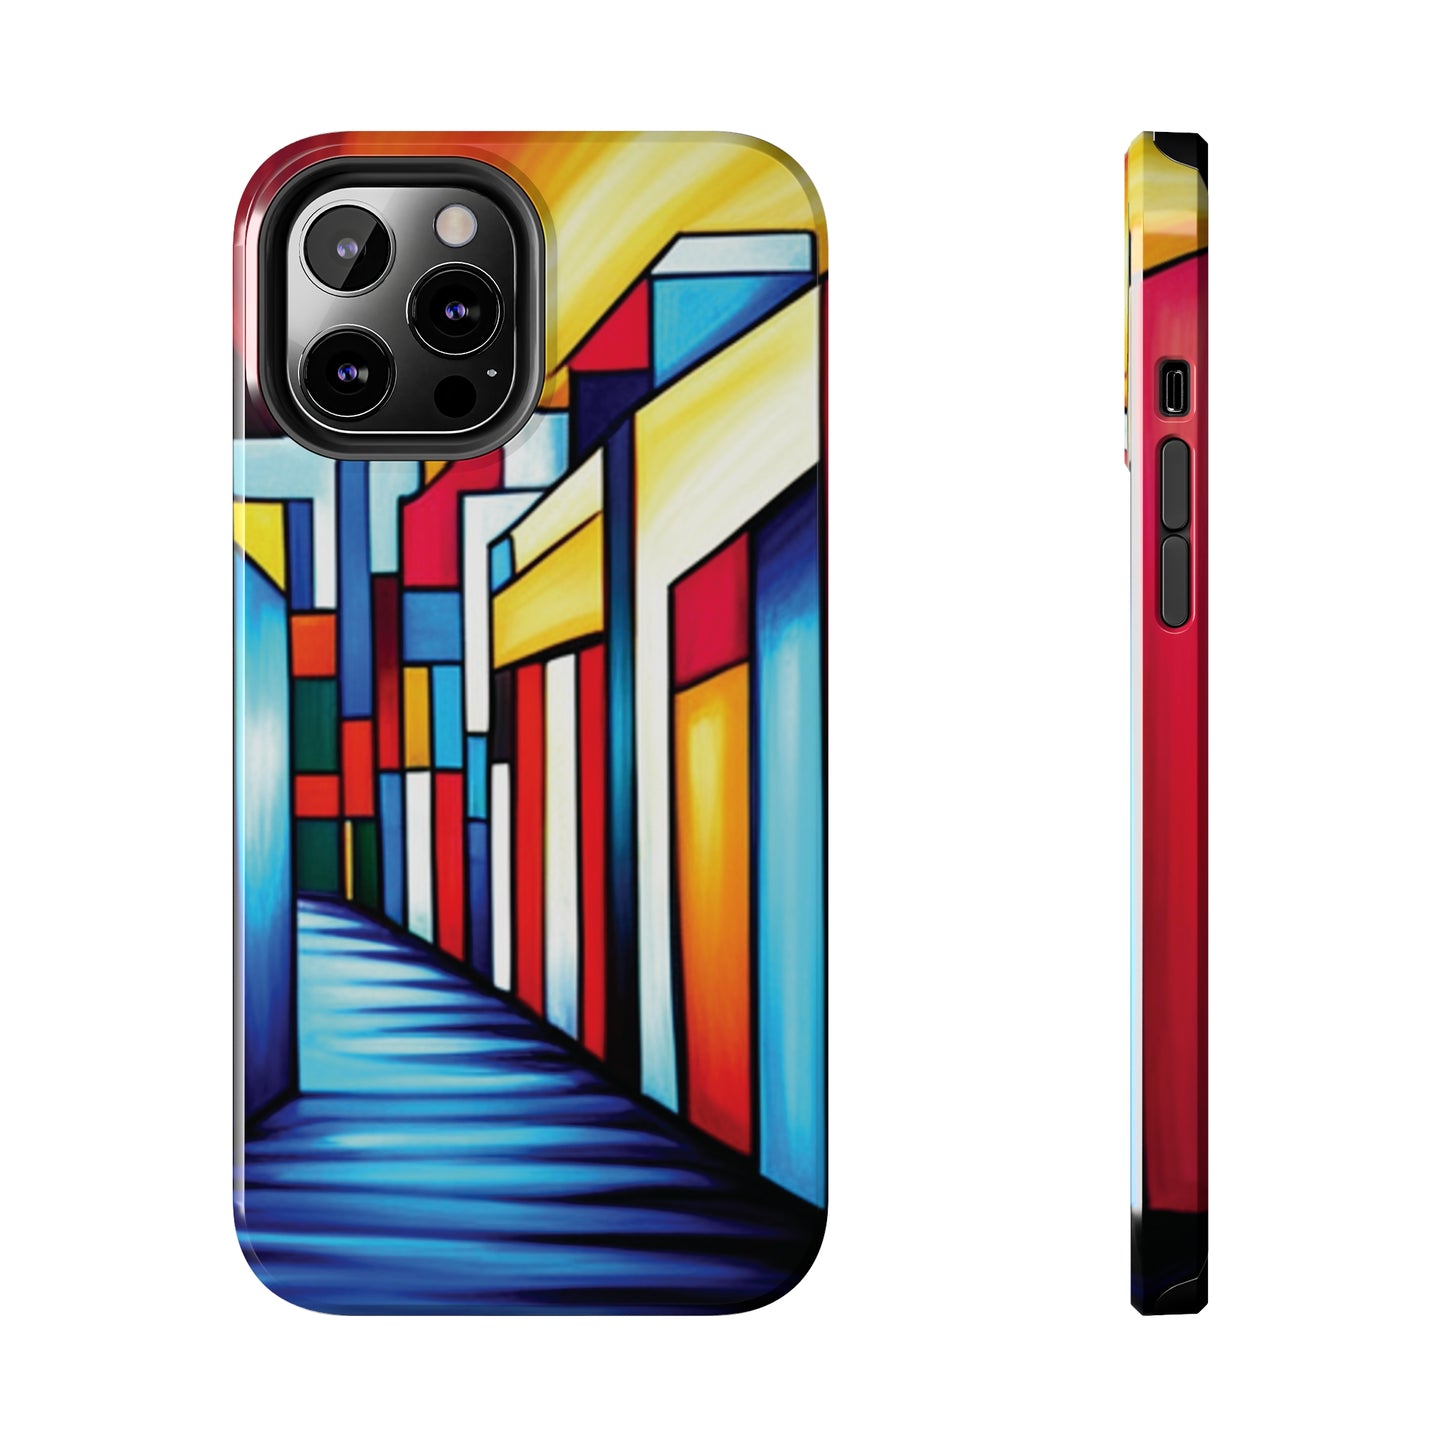 ToughDrop Apple iPhone Case Ft. Colorful Geometric Abstract Art